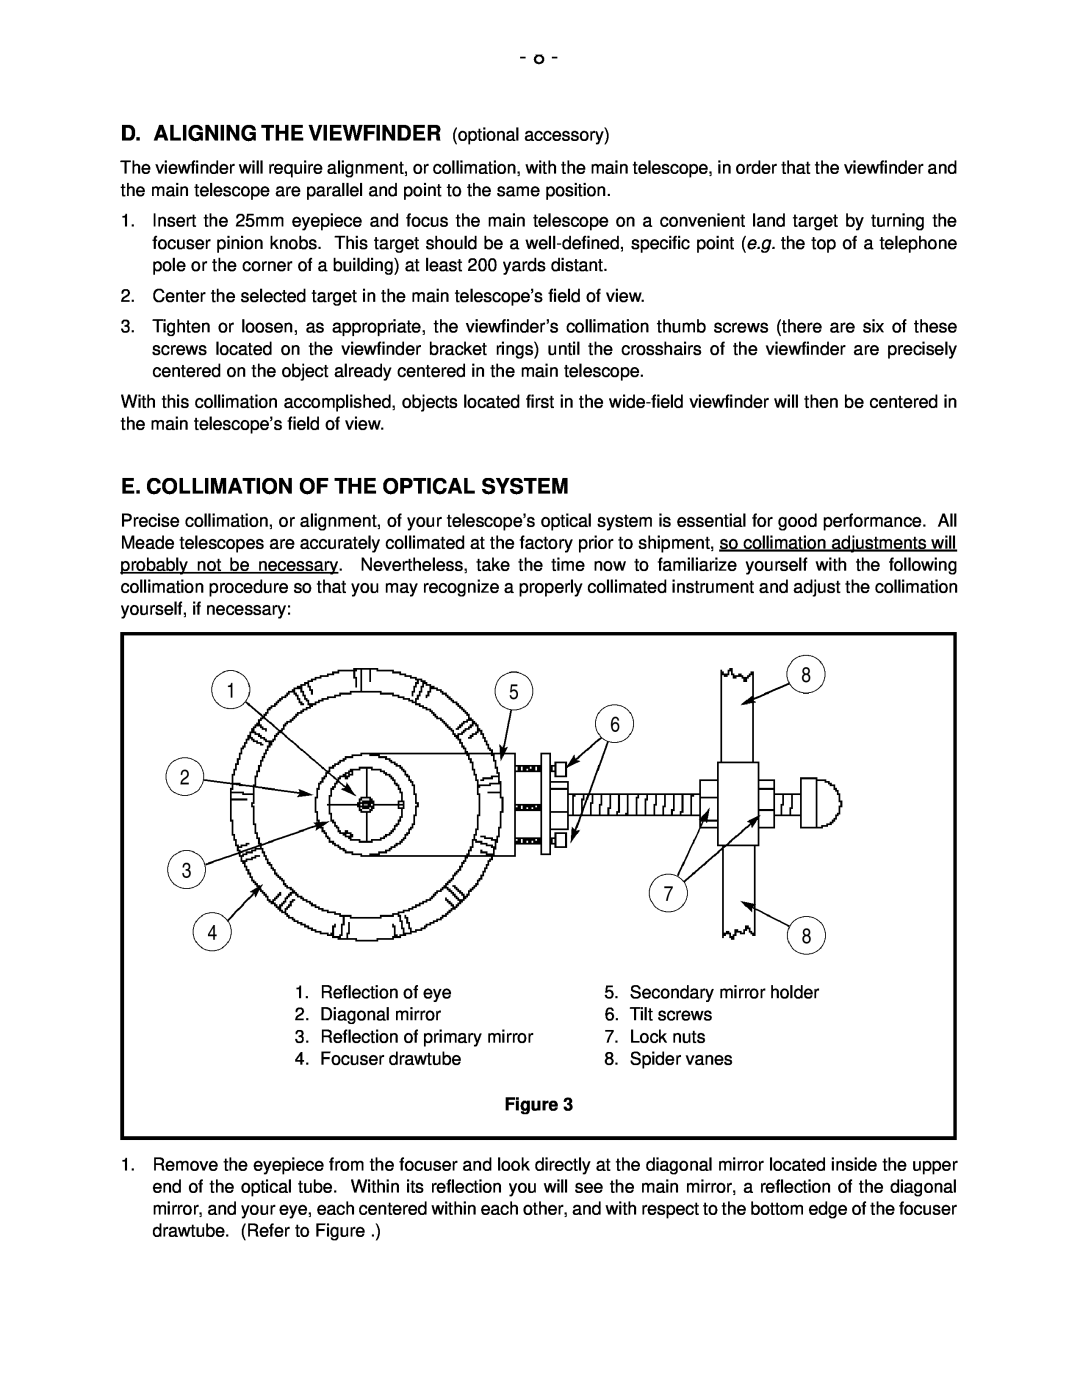 Meade 16 instruction manual 8 15 6 2, D. ALIGNING THE VIEWFINDER optional accessory, E. Collimation Of The Optical System 